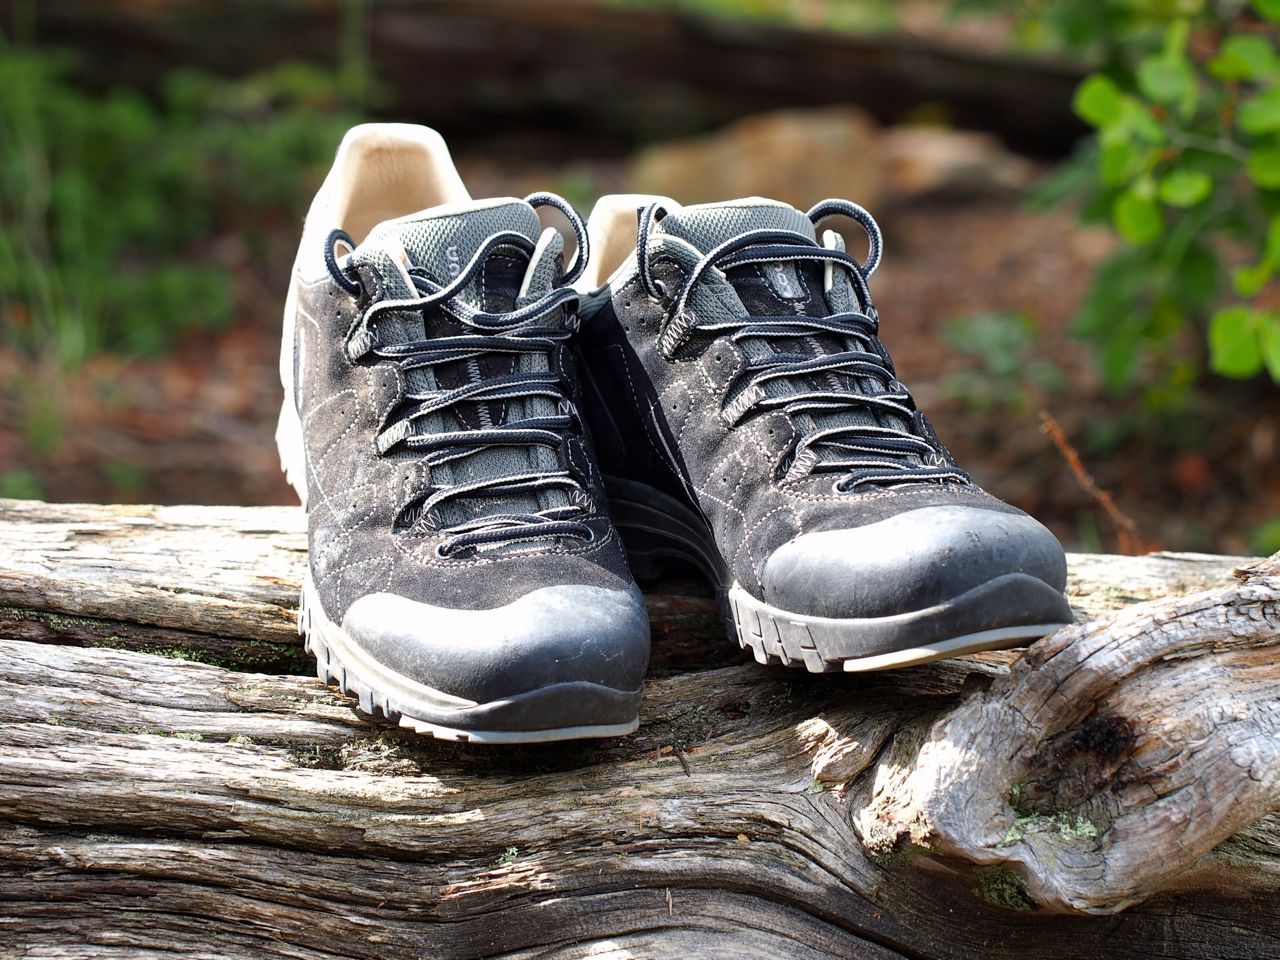 robonza: Review: Lowa Focus LL Lo Trail Shoes